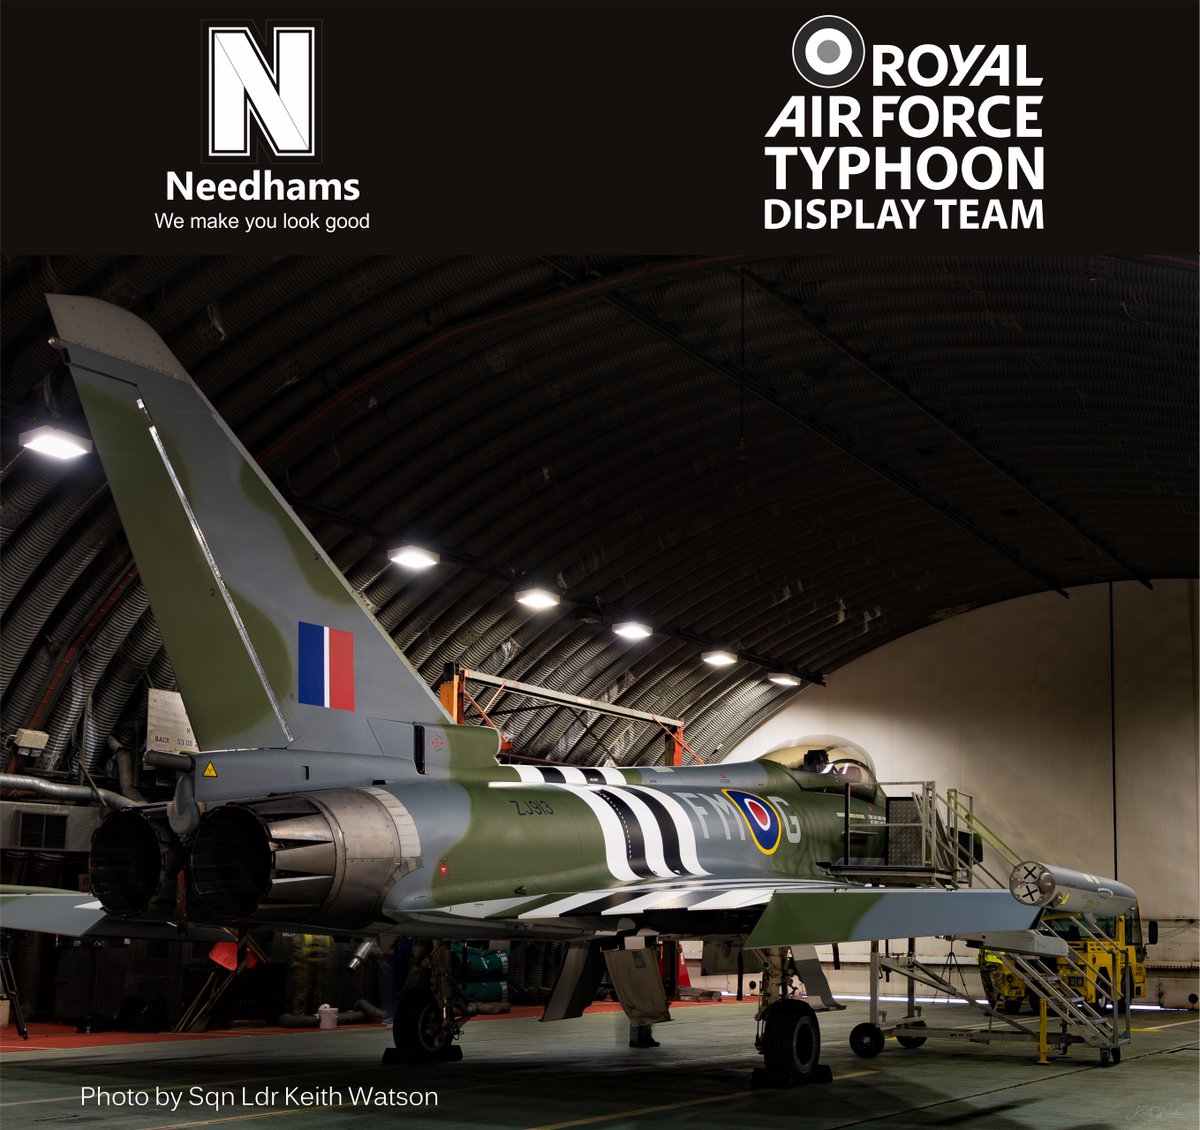 We're excited to announce that we are now proud official sponsors of the @RAFTyphoonTeam